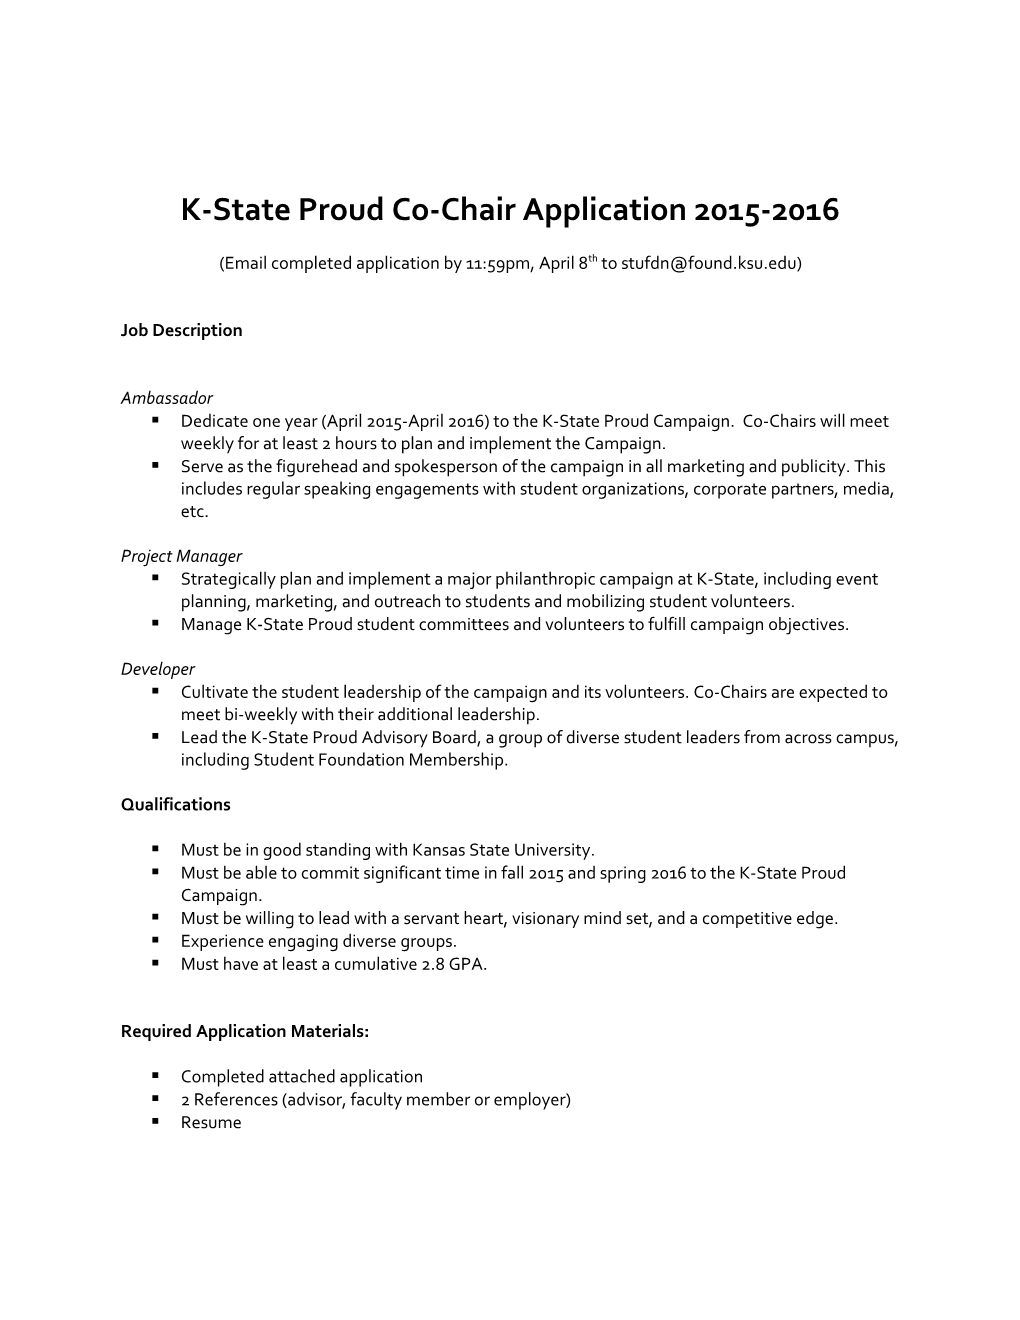 K-State Proud Co-Chair Application 2015-2016